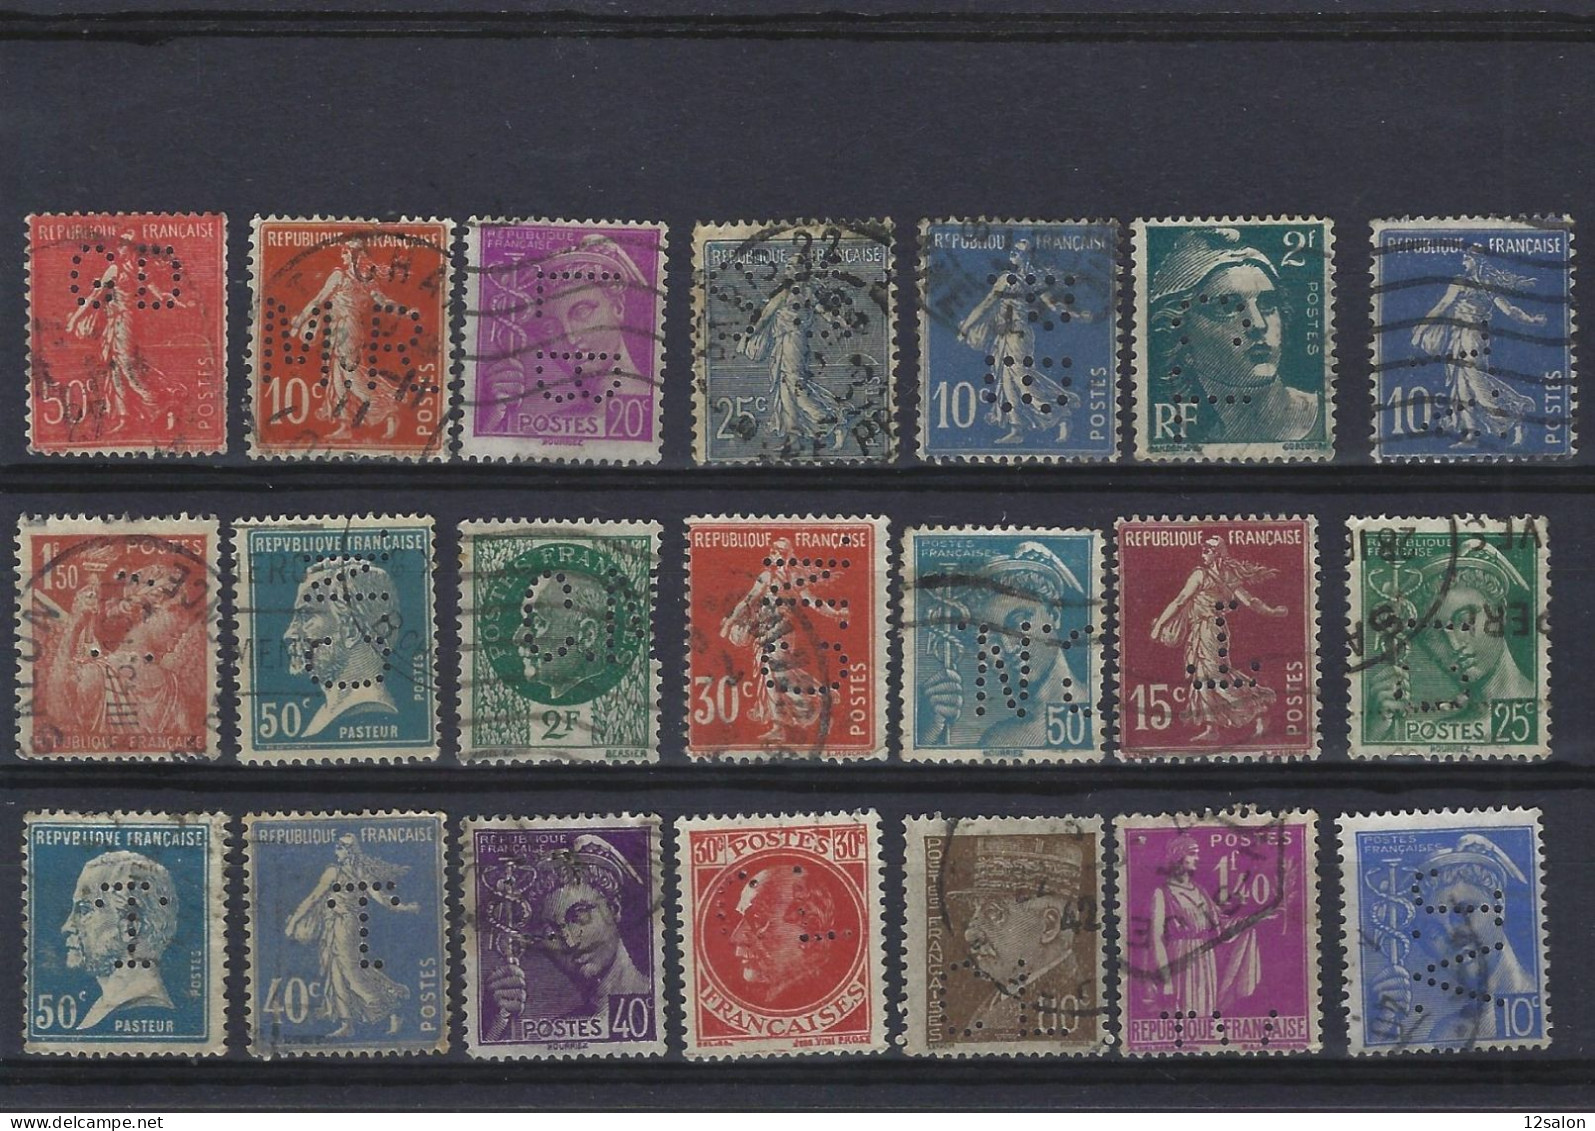 FRANCE TIMBRE LOT 2 PERFORE PERFORES PERFIN PERFINS PERFO PERFORATION PERFORIERT - Used Stamps